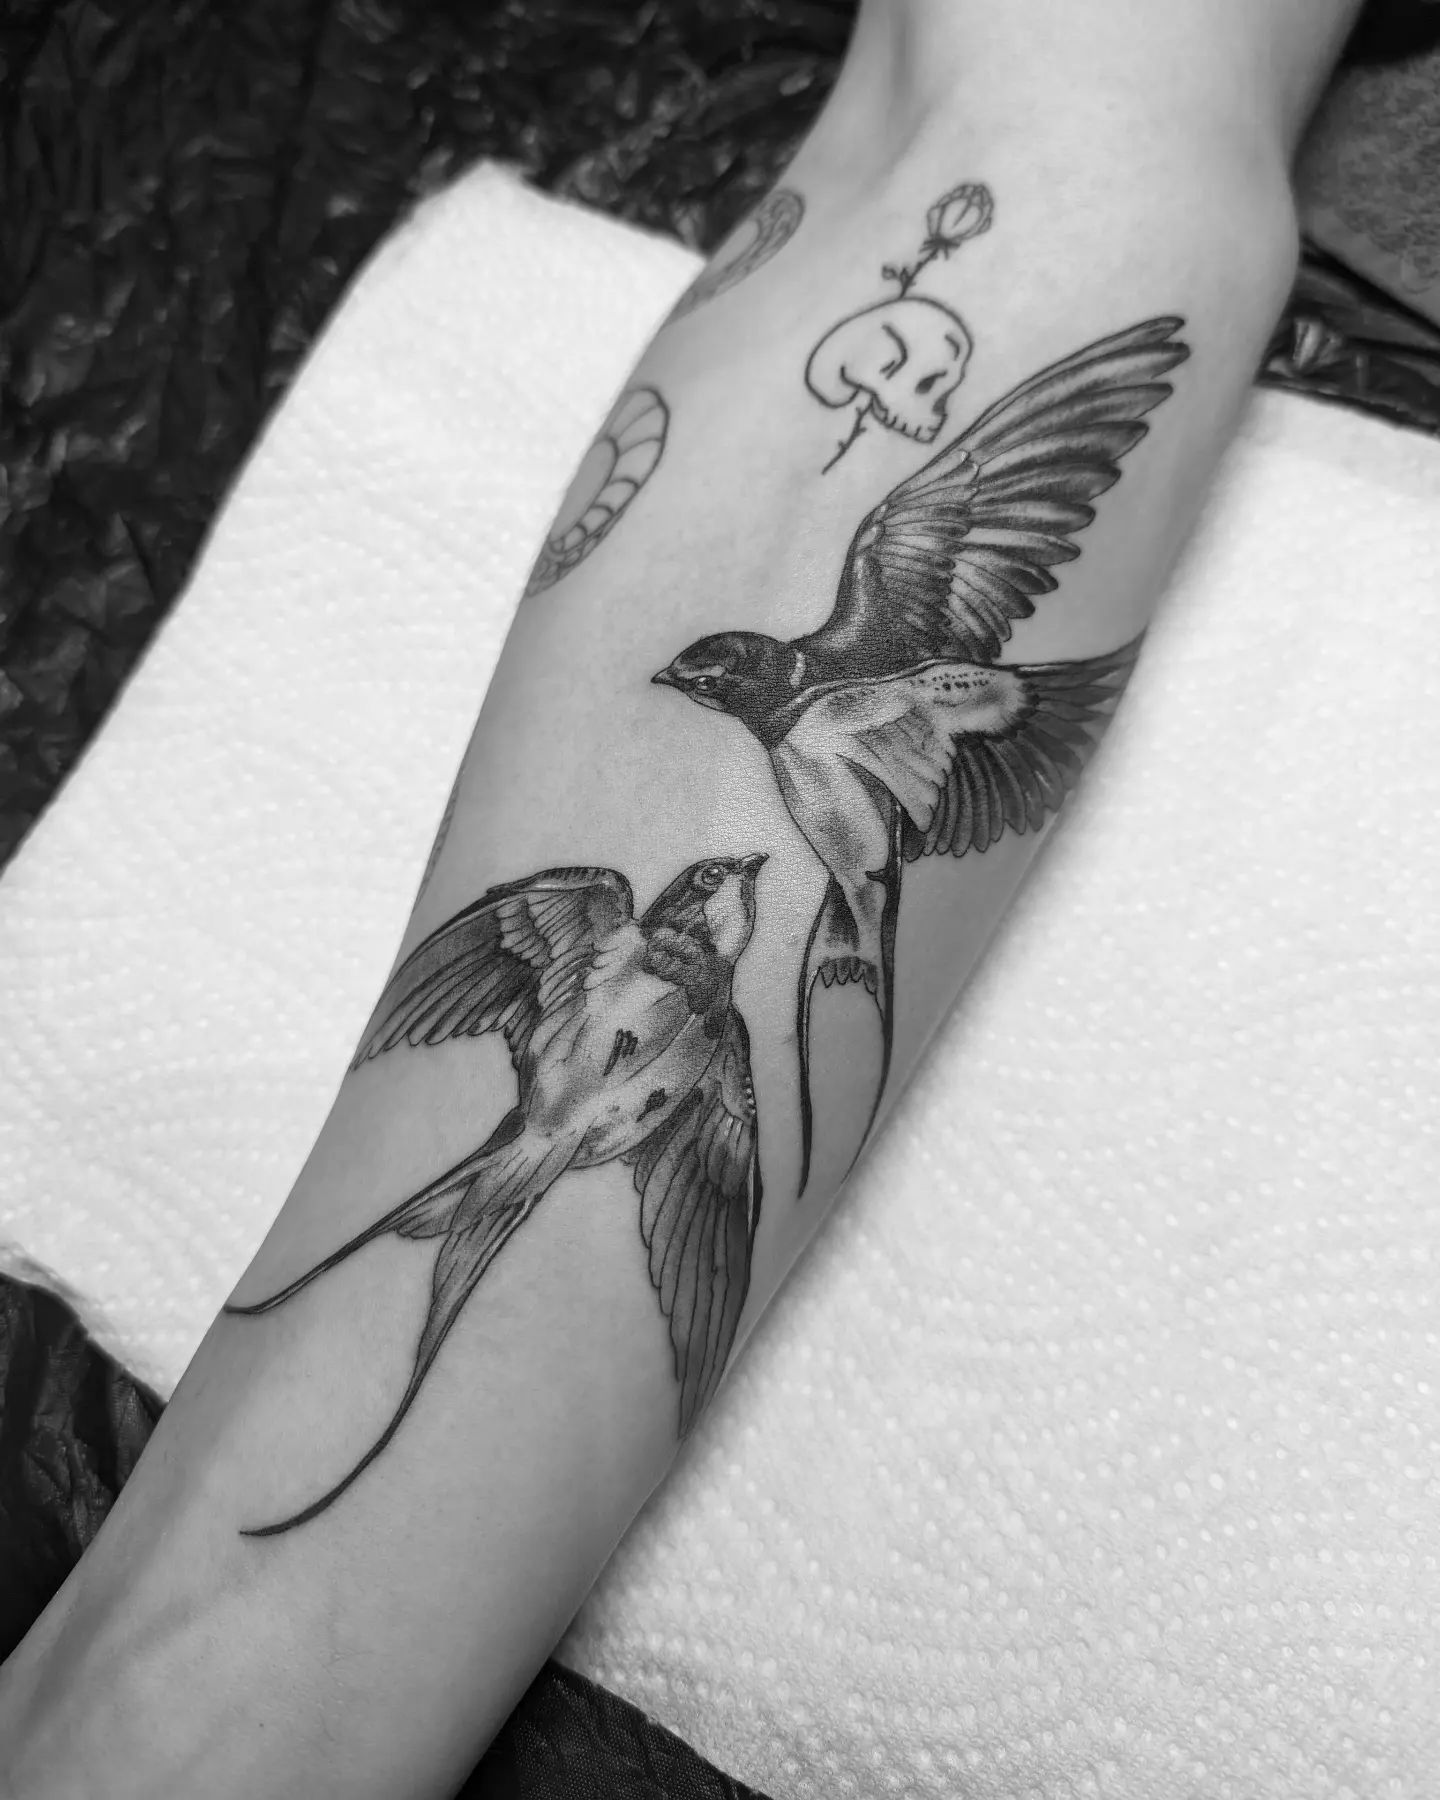 Swallows for Abel. Thanks for the visit!
-
#tattoo #traditionaltattoo #tattoos #